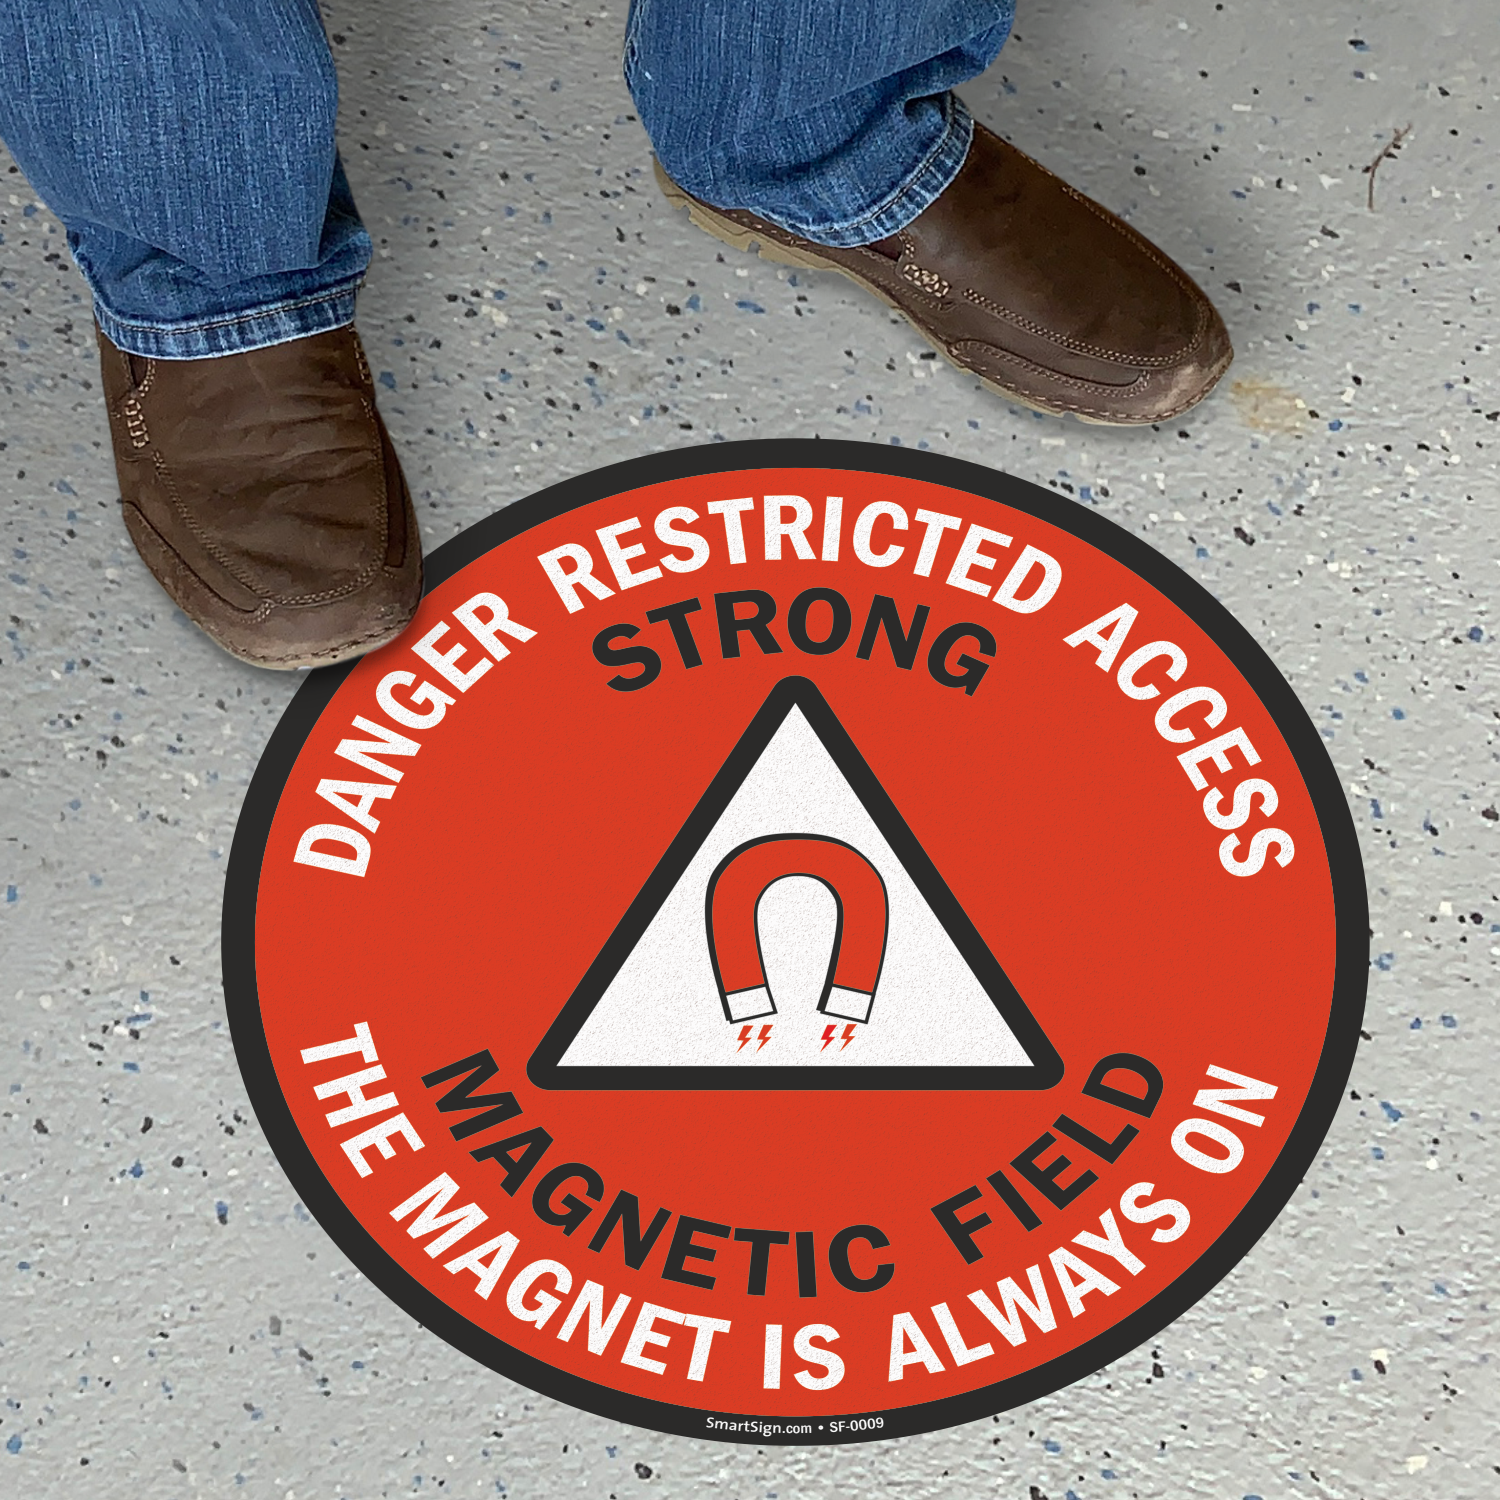 WARNING STRONG MAGNETIC FIELD OSHA DECAL SAFETY SIGN STICKER 3M USA MADE 